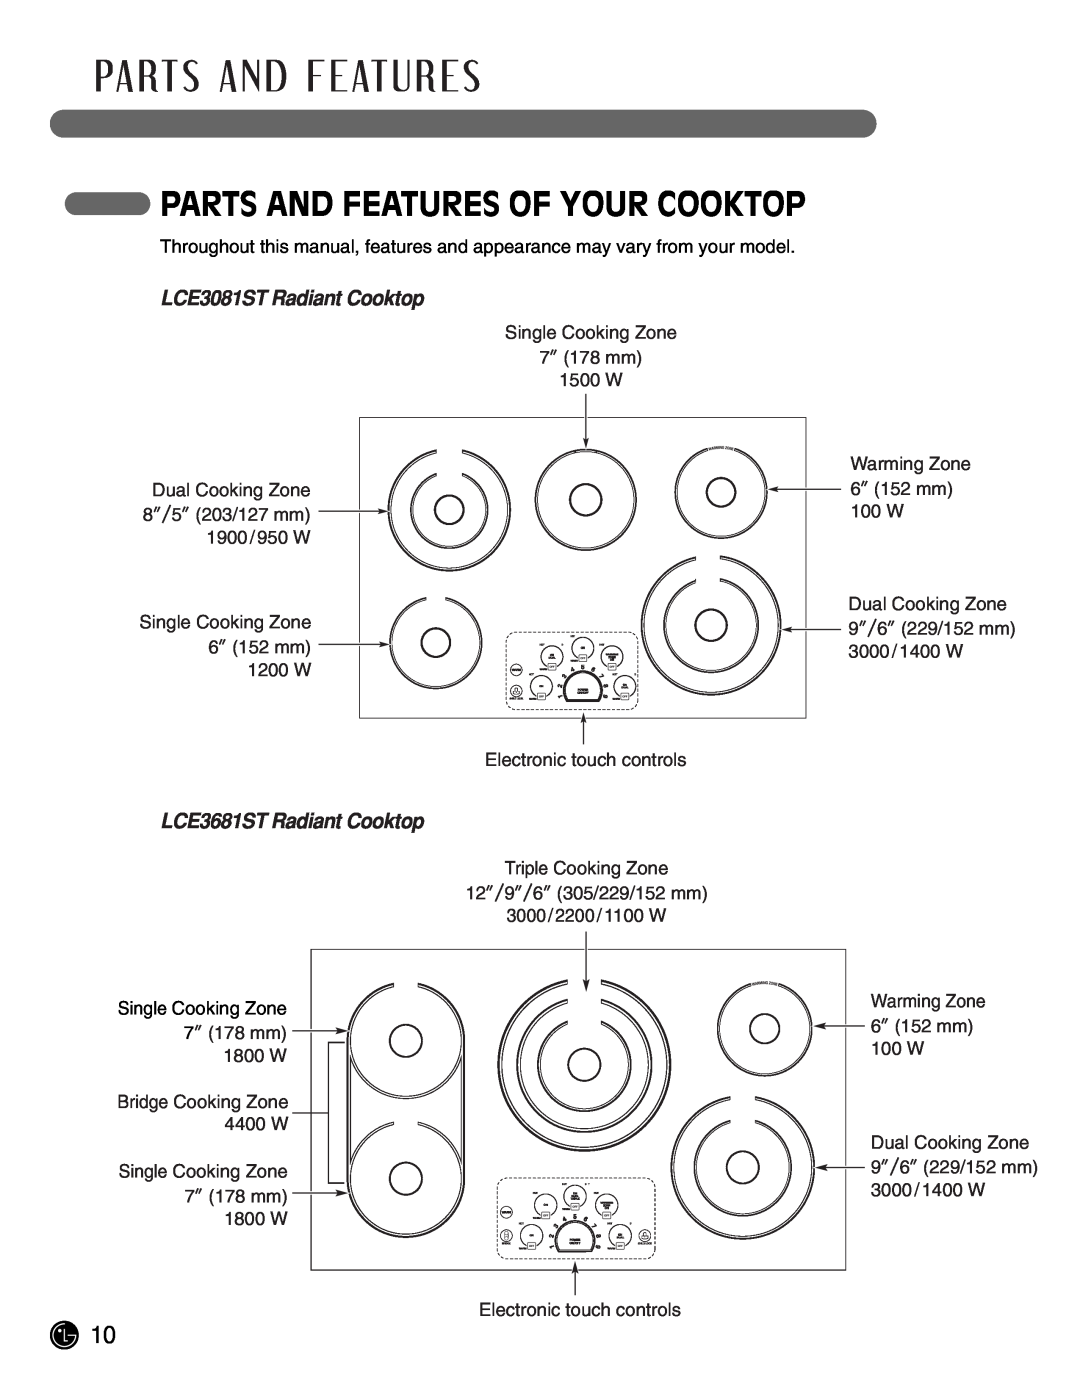 LG Electronics manual Parts And Features Of Your Cooktop, LCE3081ST Radiant Cooktop, LCE3681ST Radiant Cooktop 